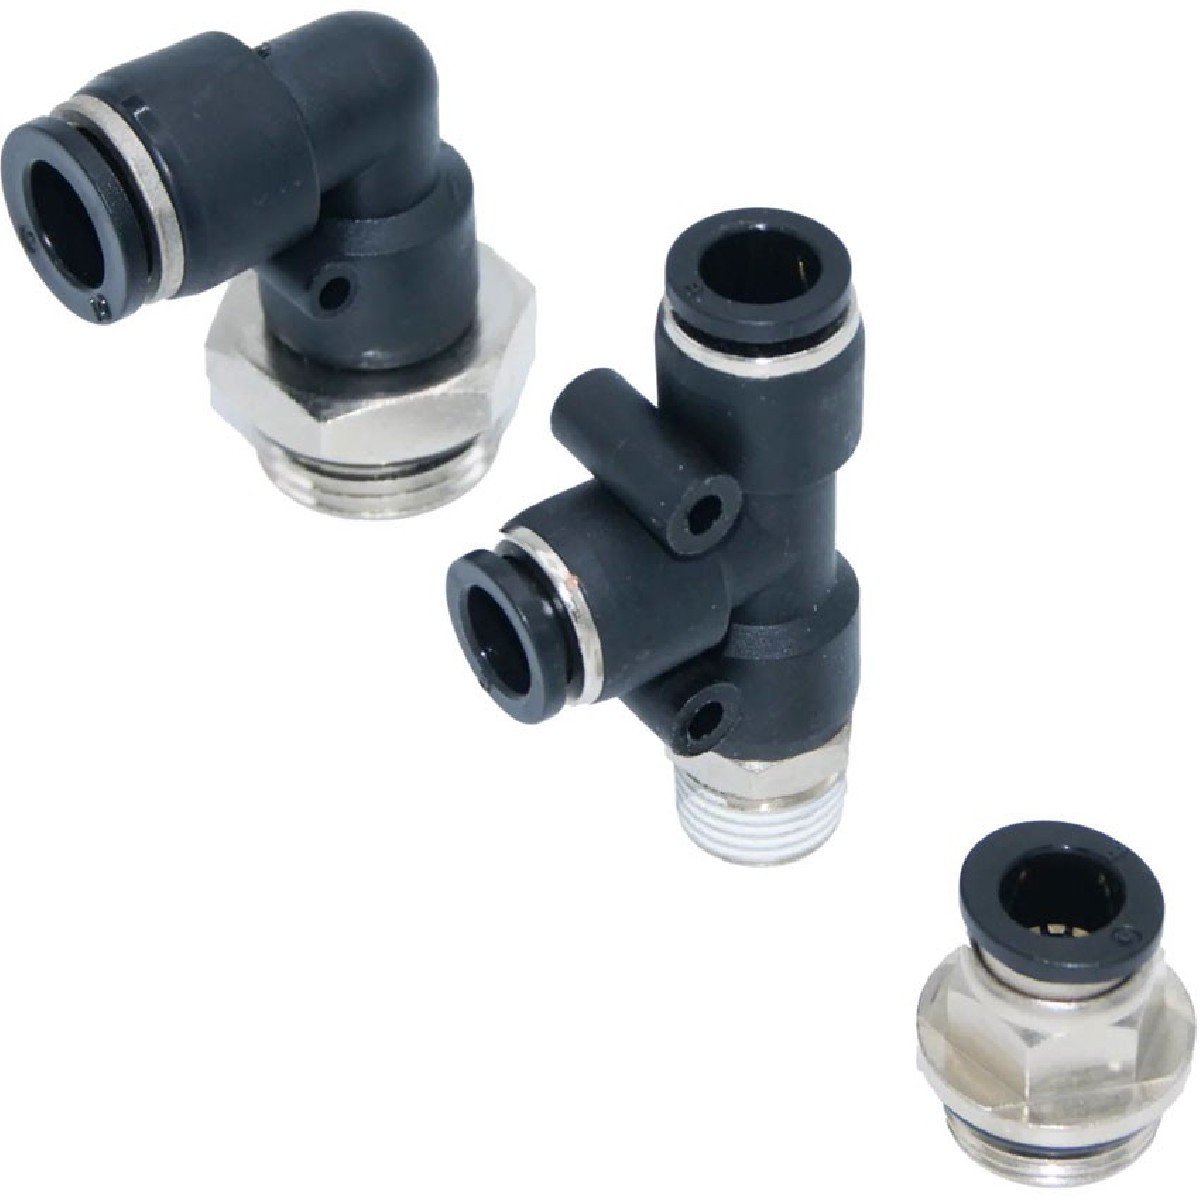 Pneumatic fittings in plastic and stainless steel from Davair Ireland